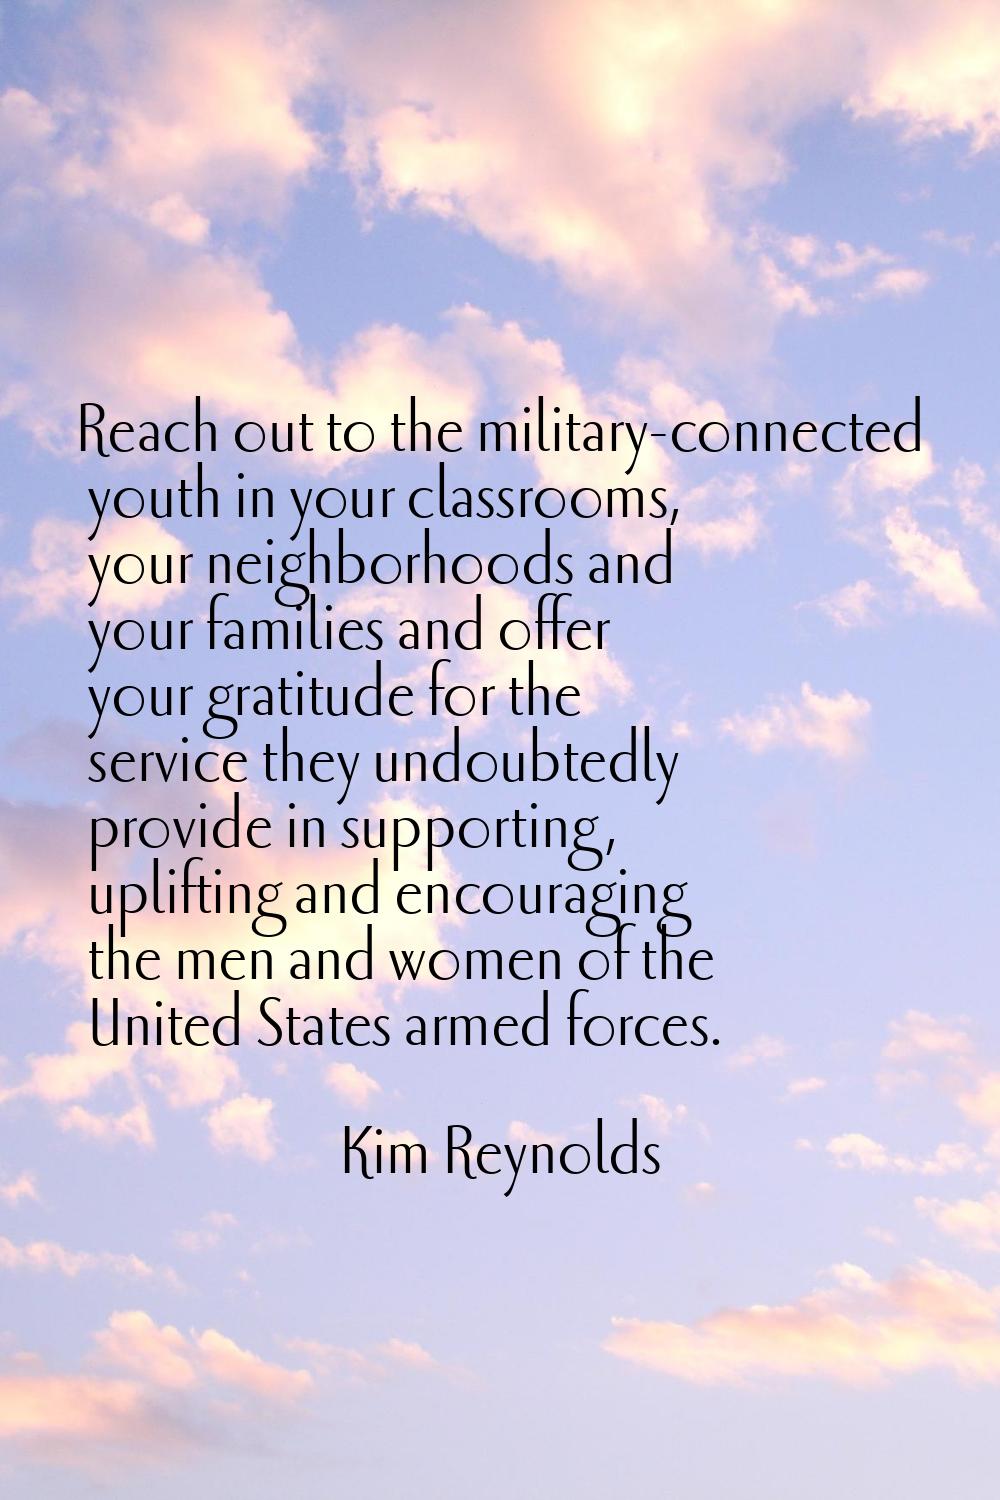 Reach out to the military-connected youth in your classrooms, your neighborhoods and your families 